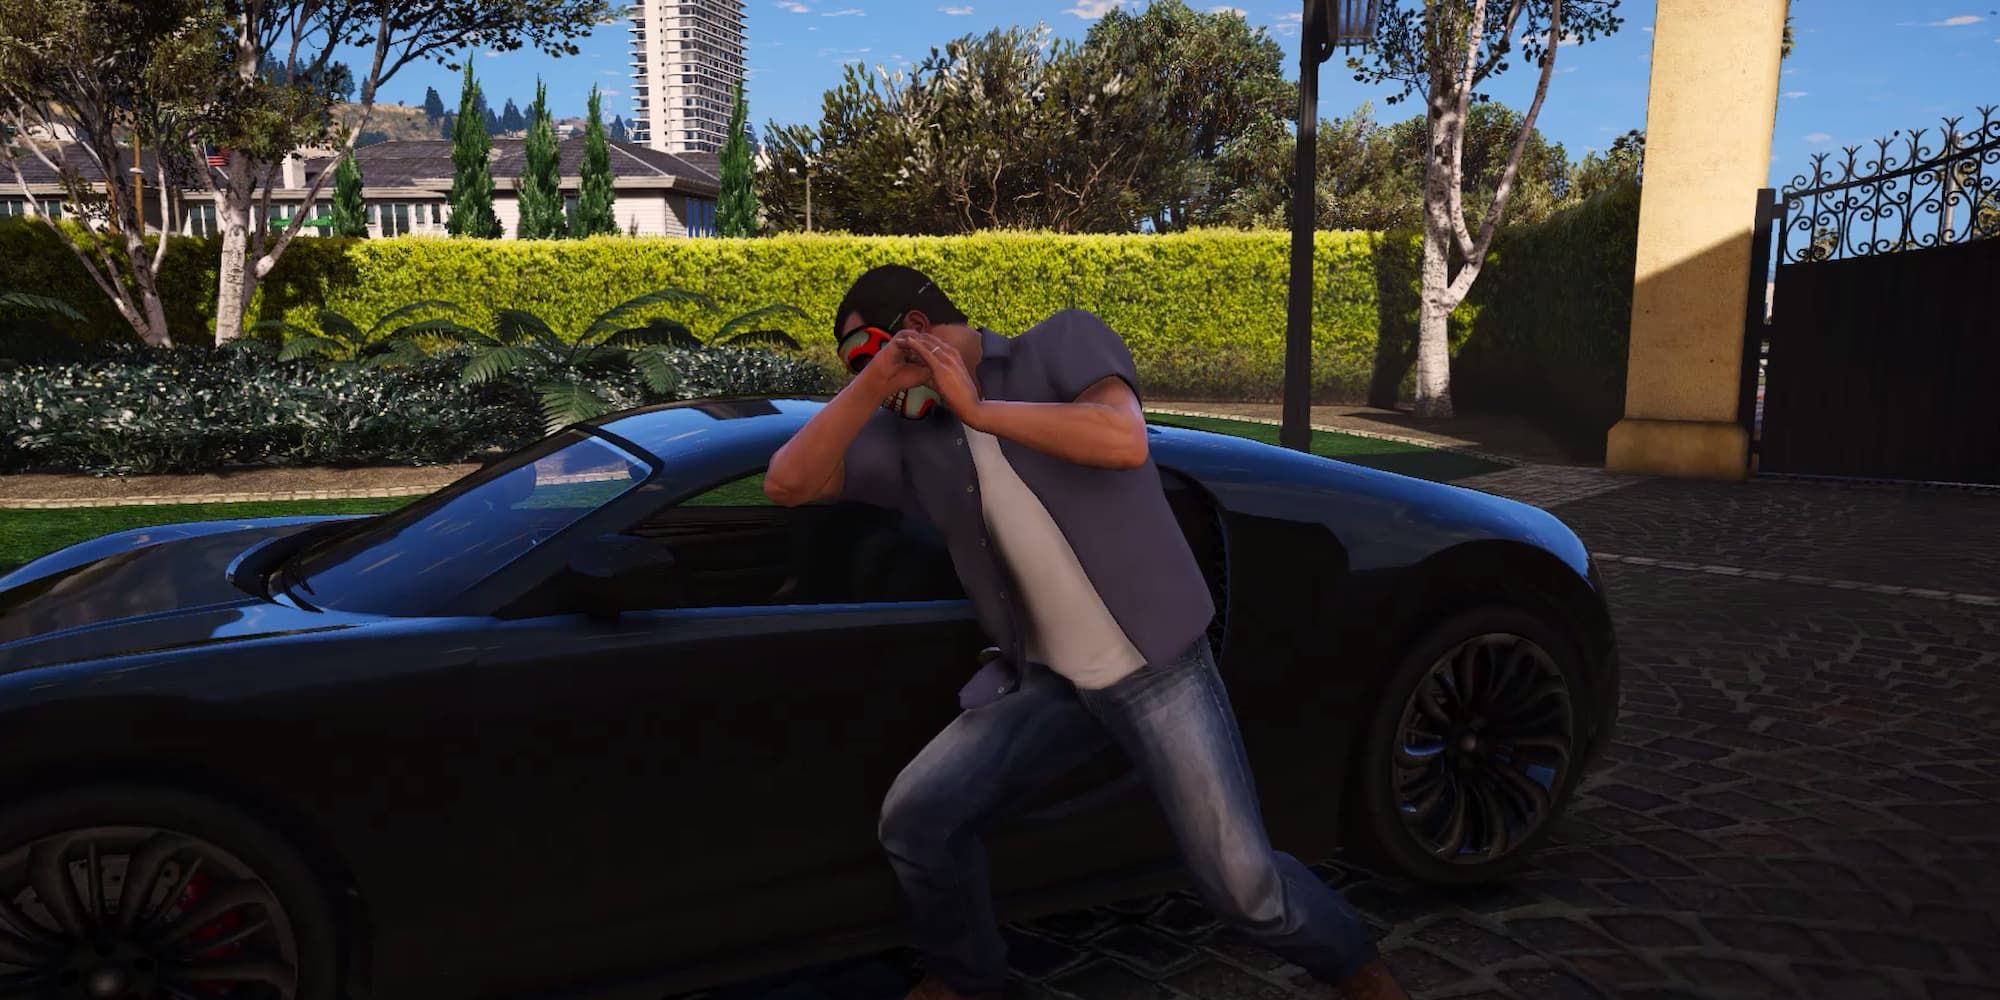 Players attempt to break car windows with their elbows in hopes of stealing vehicles in GTA 5.